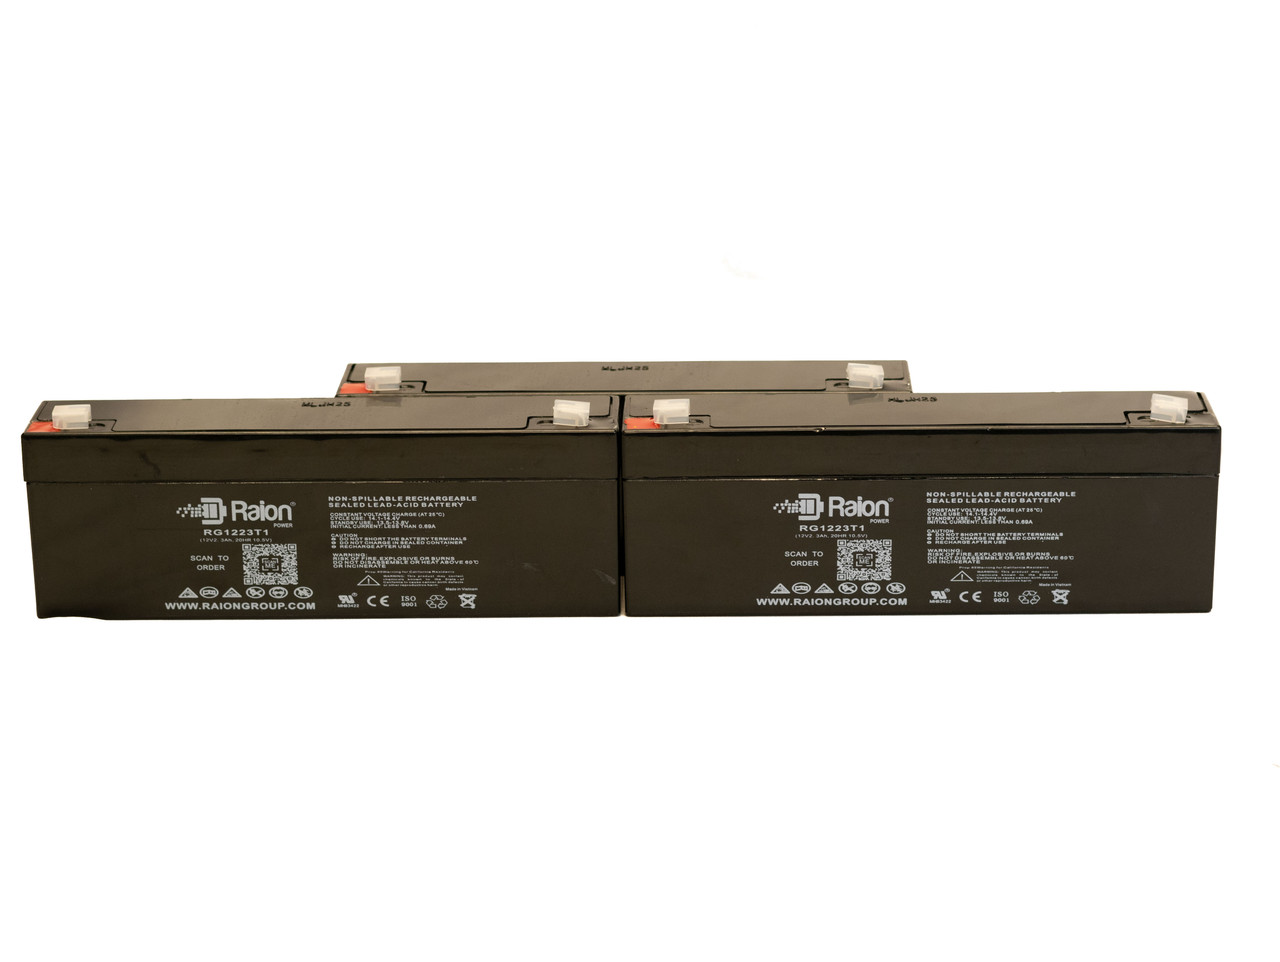 Raion Power 12V 2.3Ah RG1223T1 Replacement Medical Battery for DataScope Corp Accustat - 3 Pack